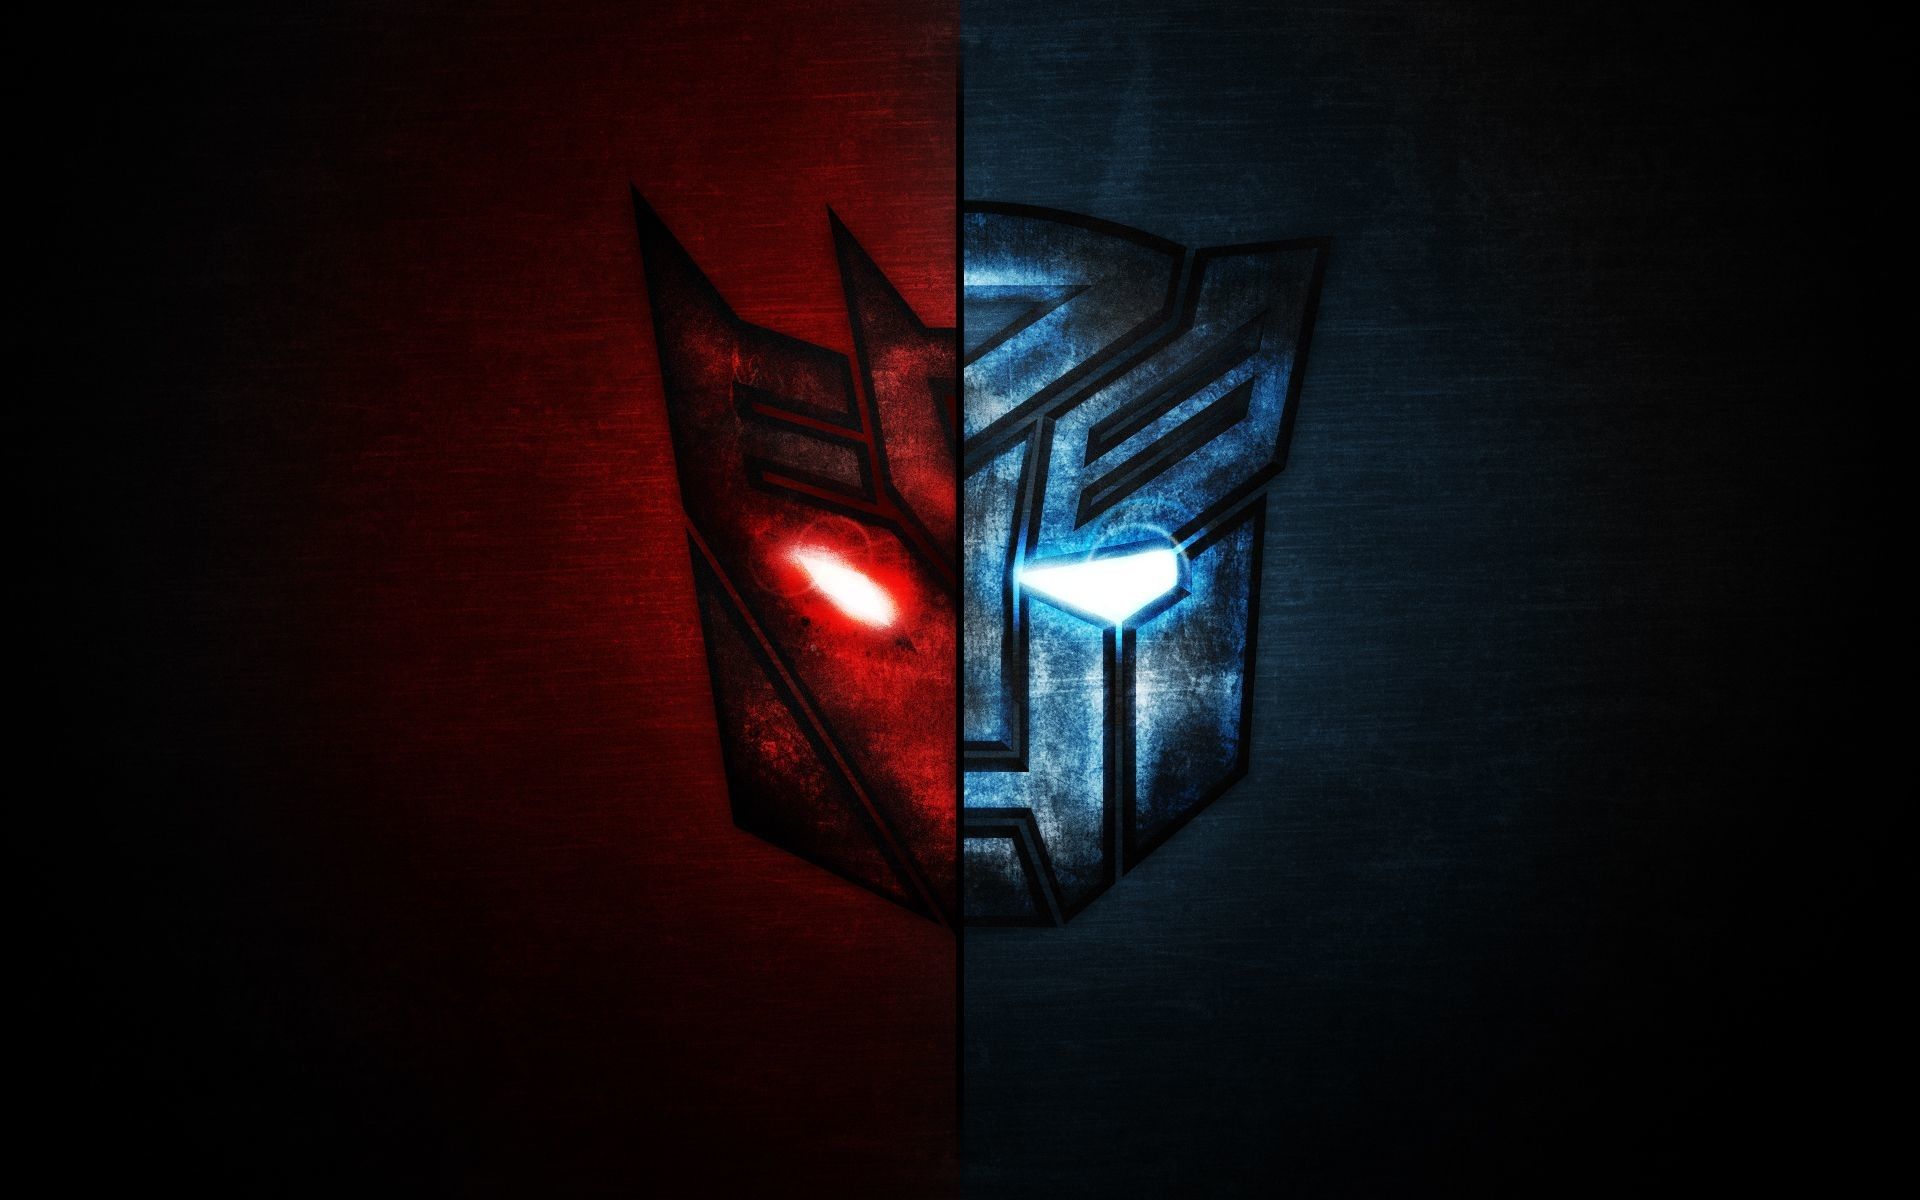 Autobot Wallpapers